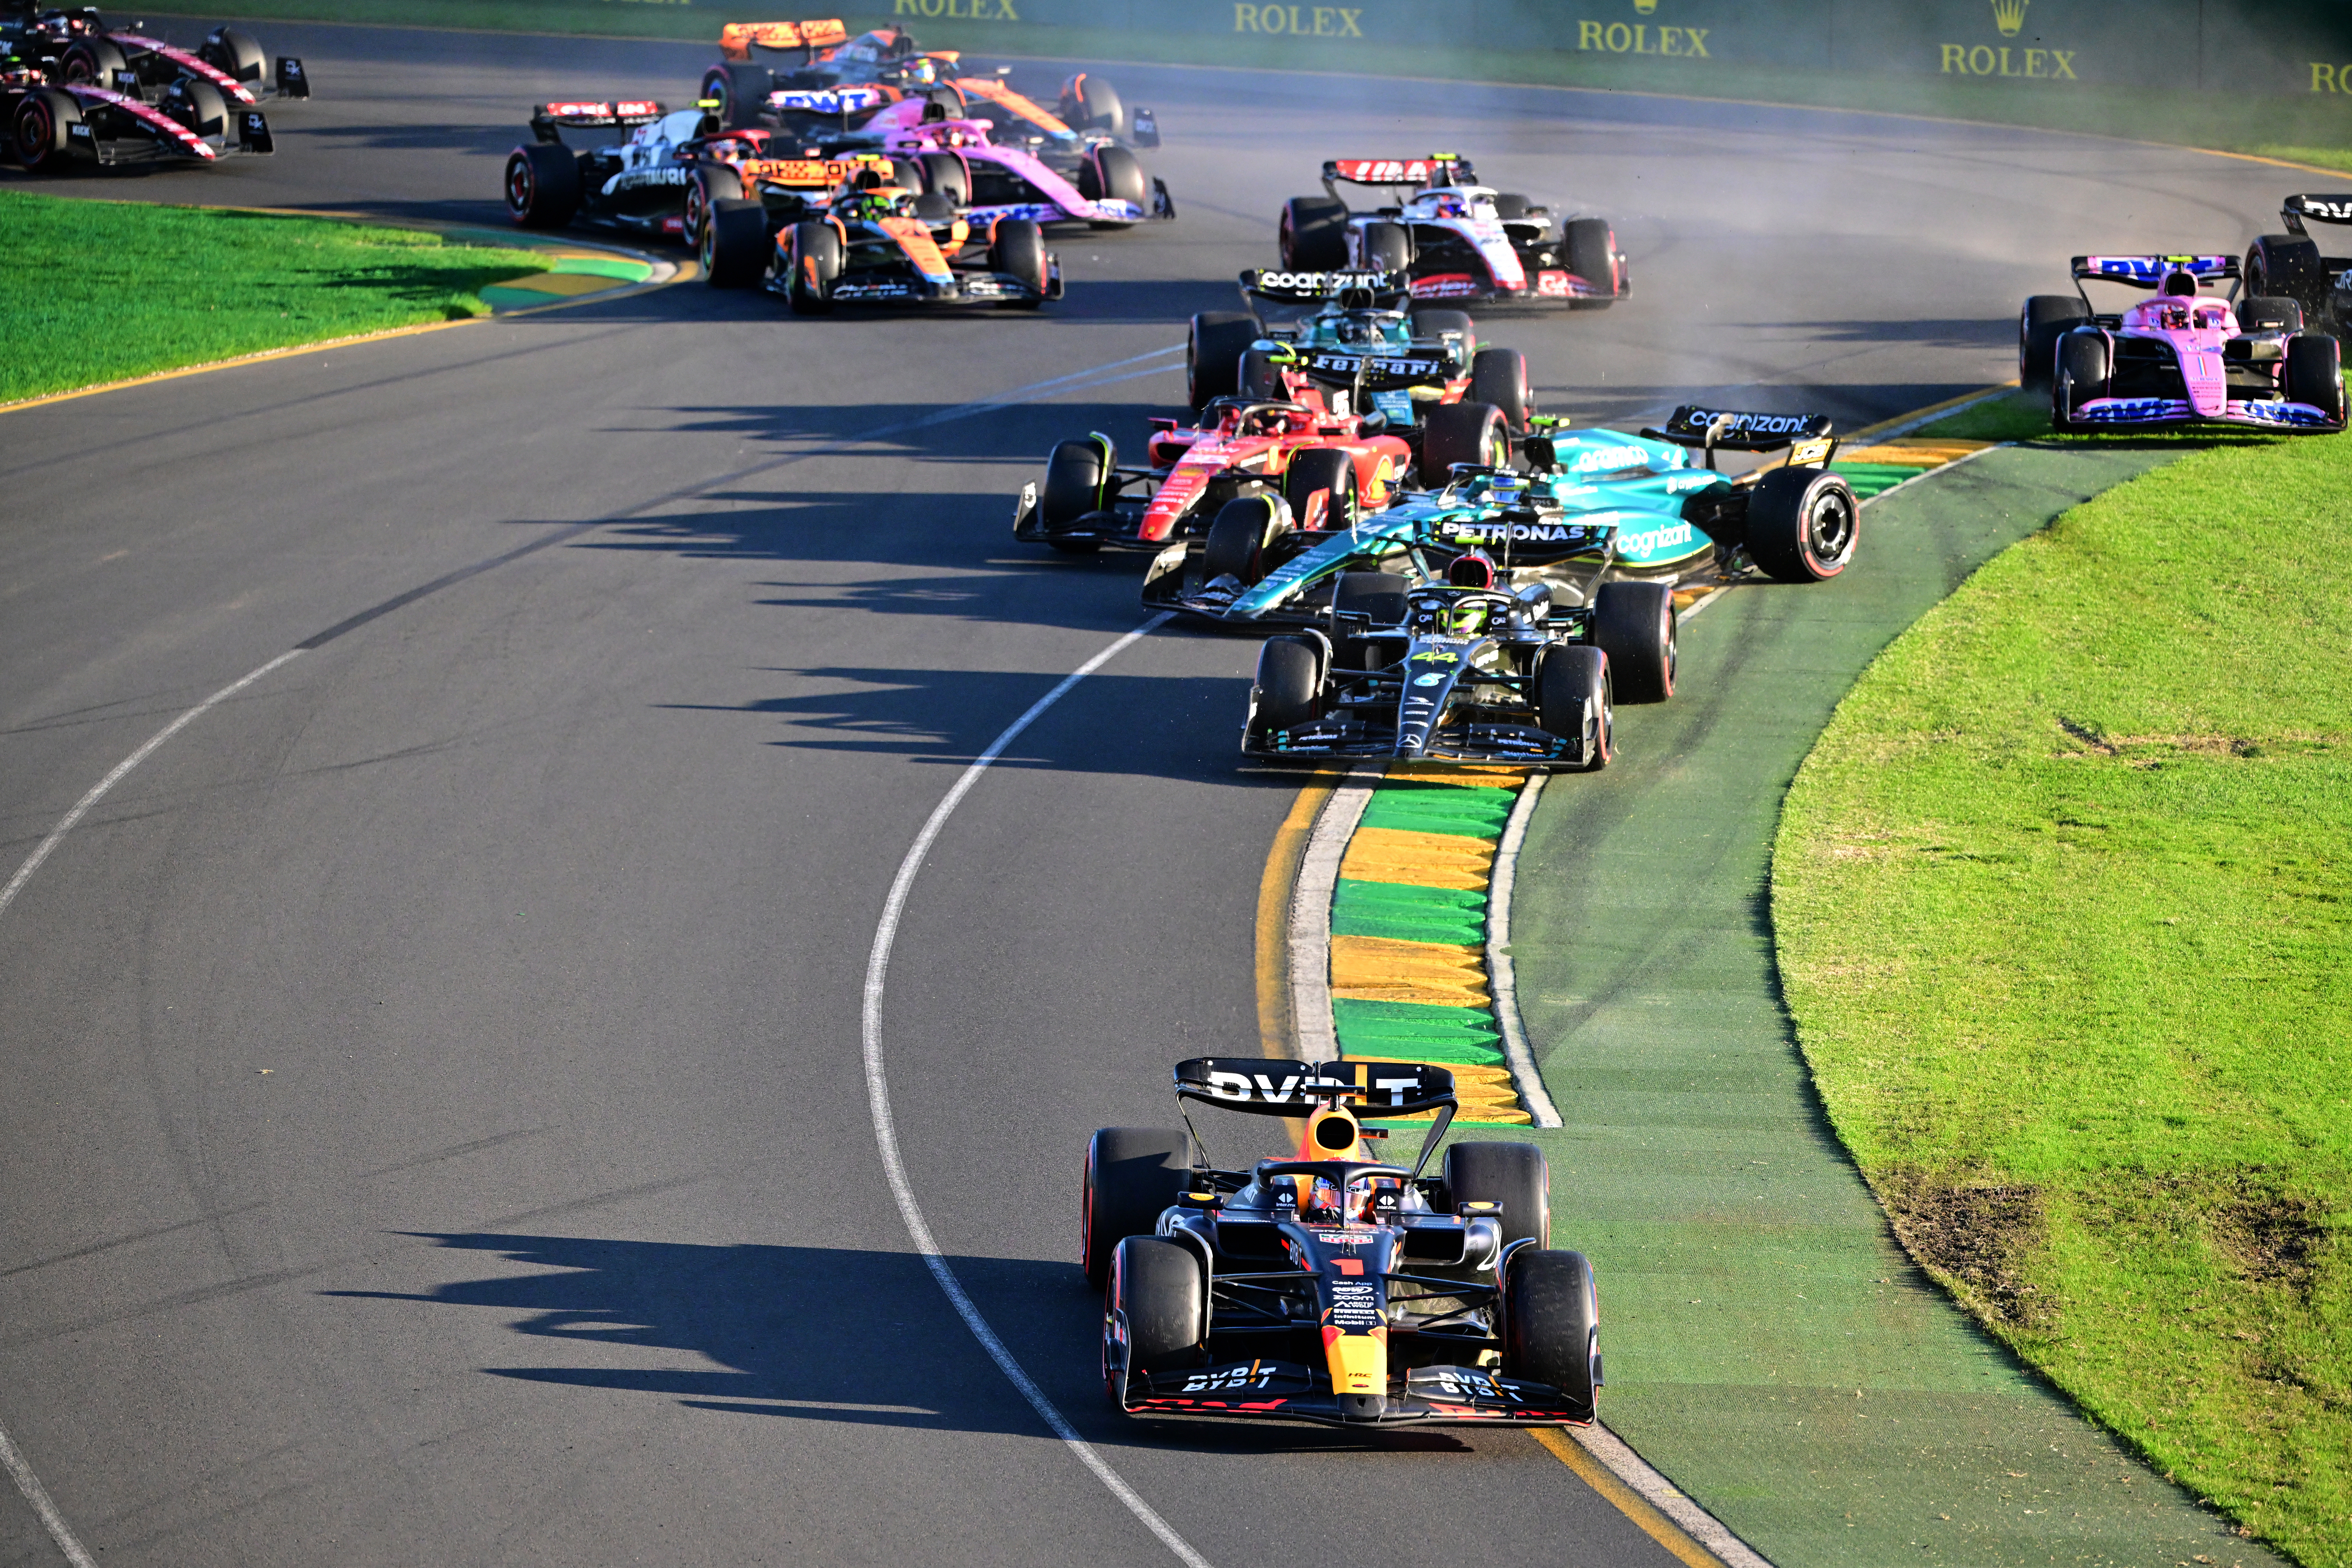 Everything you need to know before the Australian Grand Prix